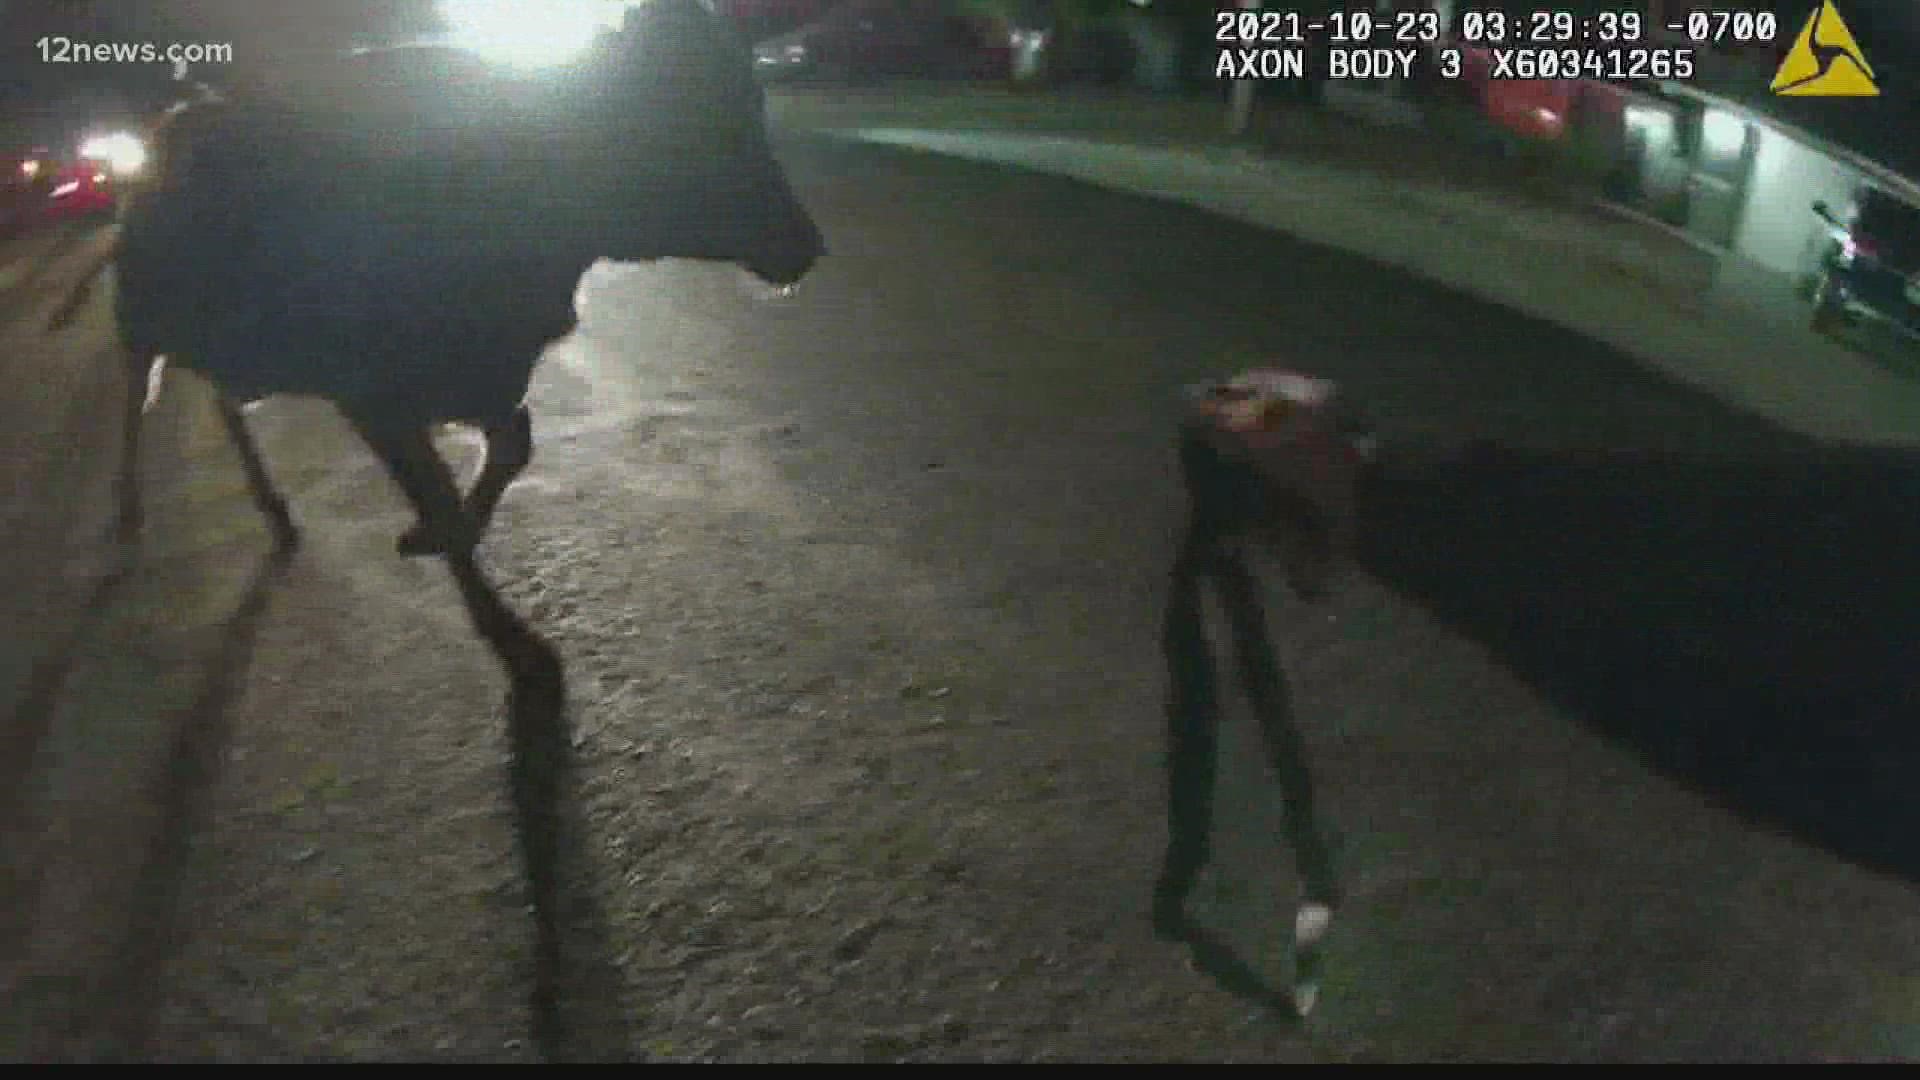 Glendale police officers chased after a cow Saturday that was running loose through a residential neighborhood near Cactus Road and 67th Avenue.